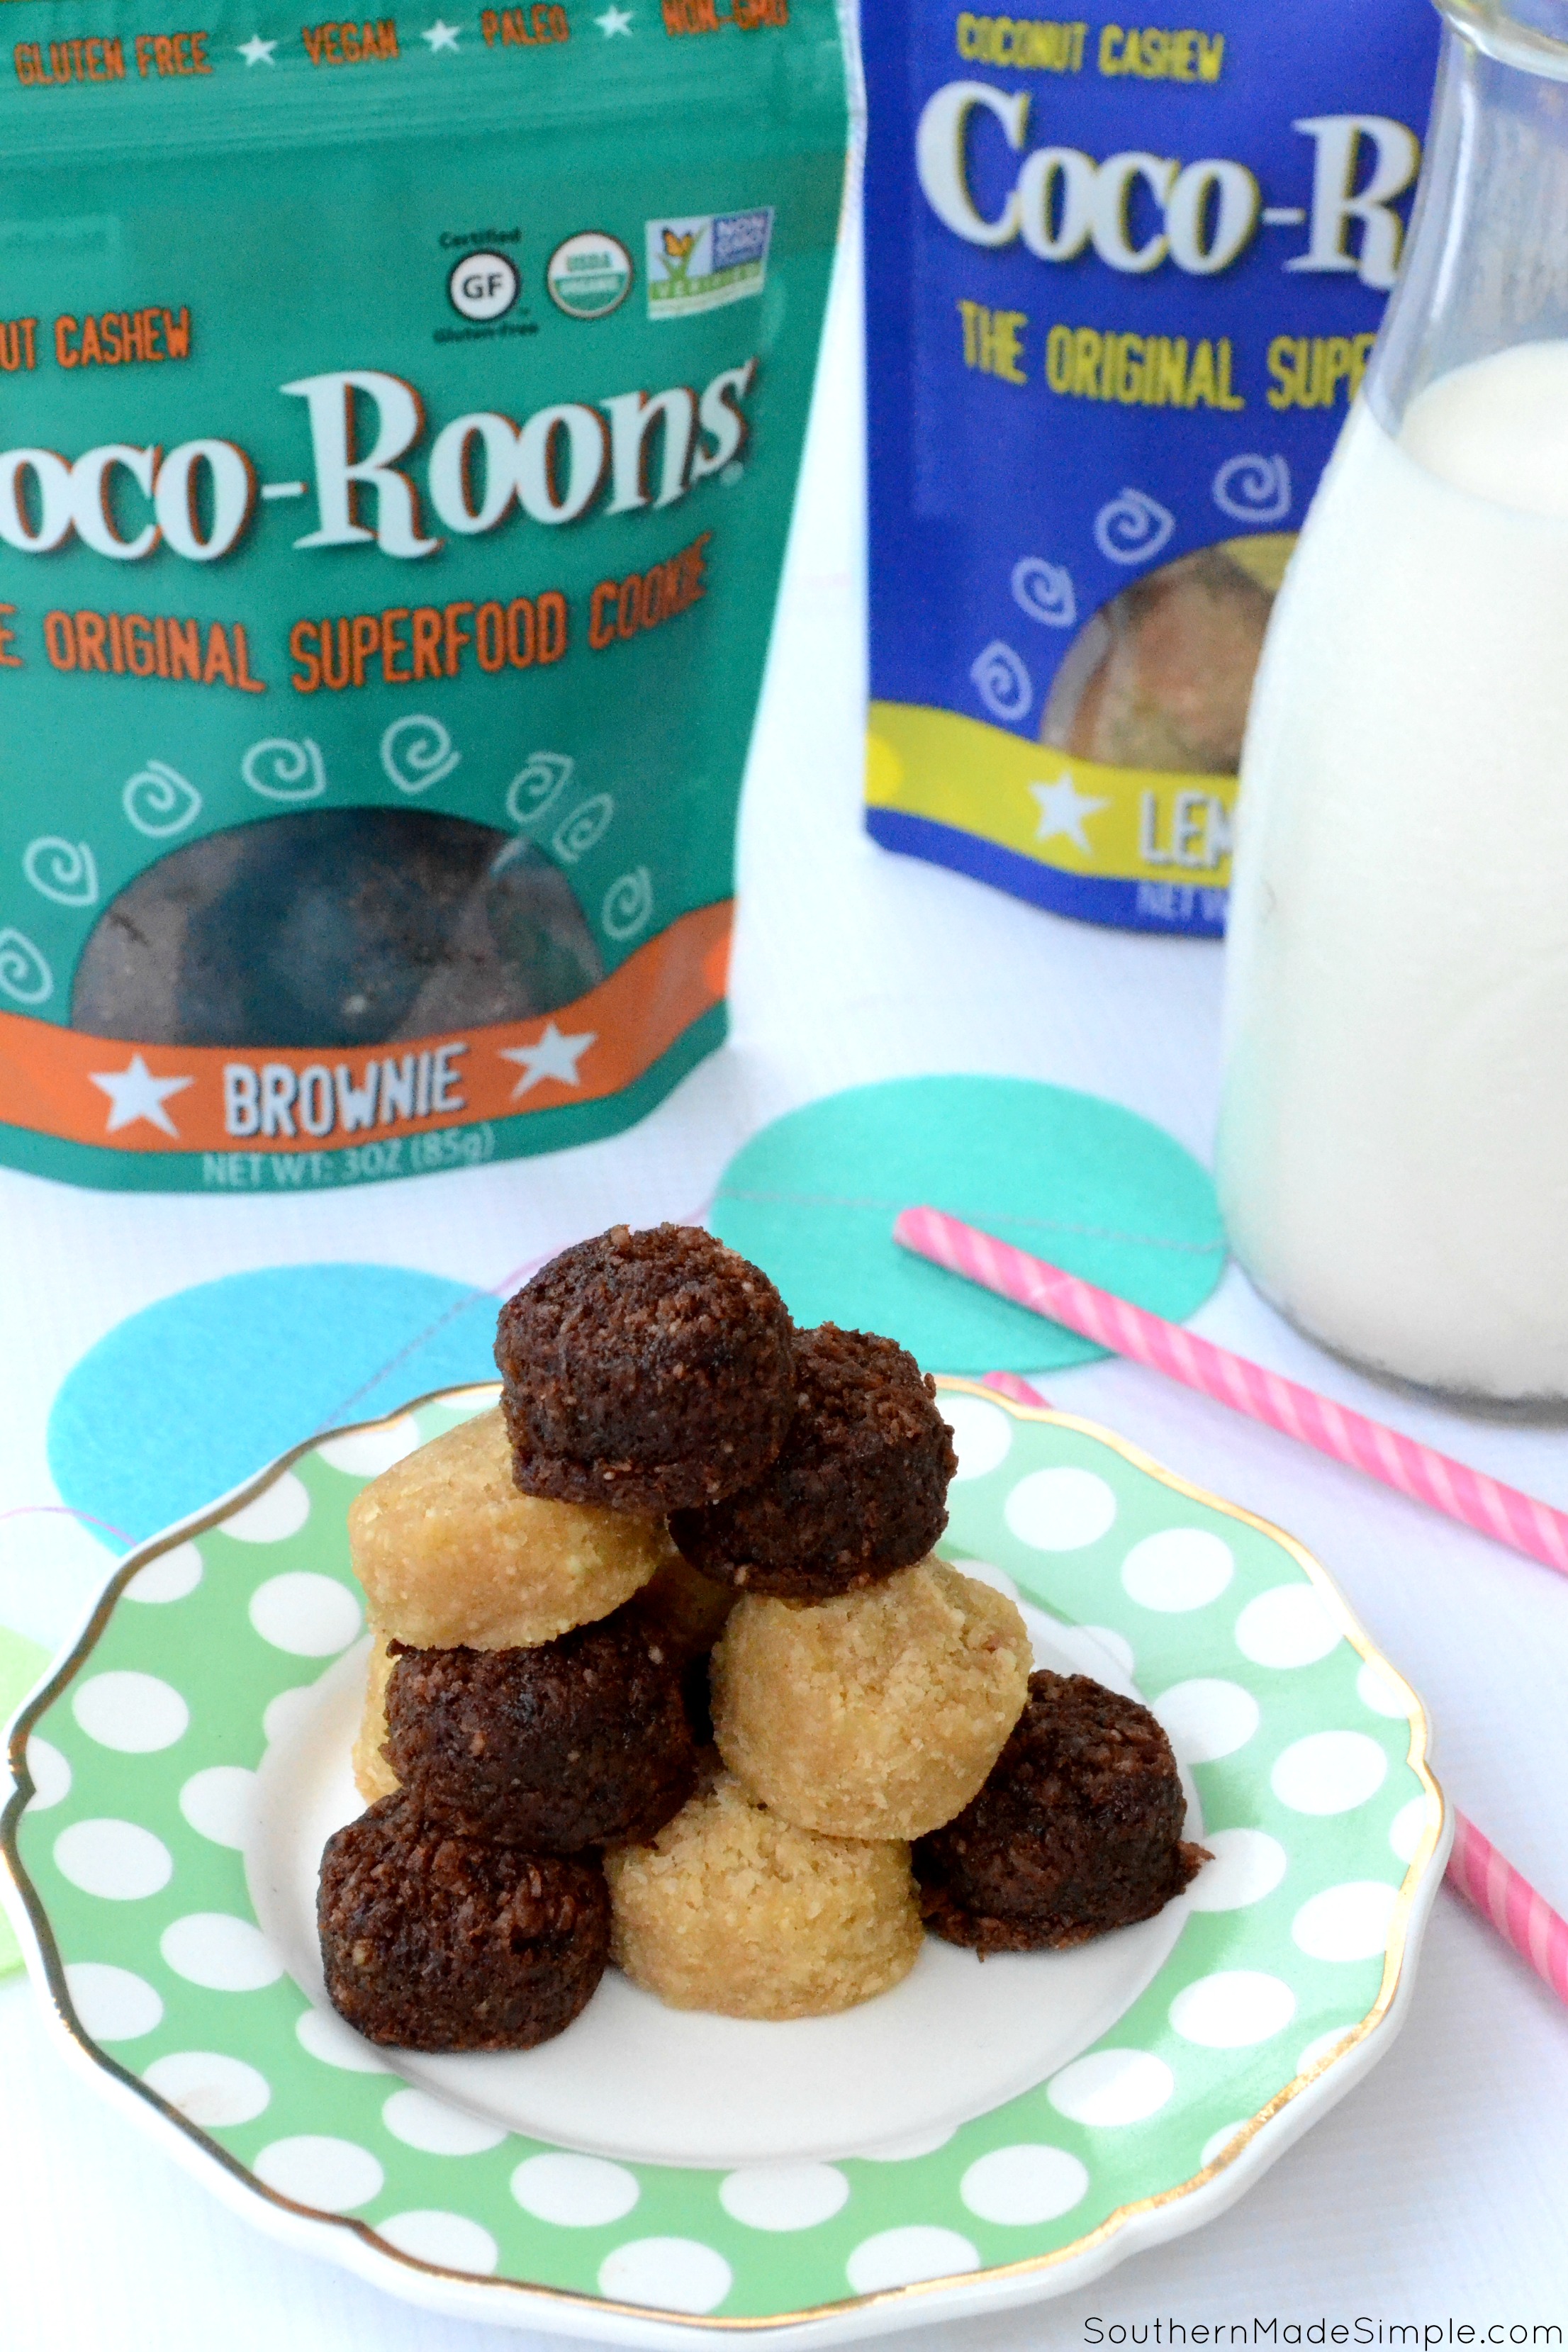 Looking for a little slice of guilt-free goodness to munch on? Sejoyia Coco-Roons are giving me total life, AND they're good for you! You can find them in the gluten free section at your local Walmart! #CoCoRoonsAtWalmart #Pmedia #ad